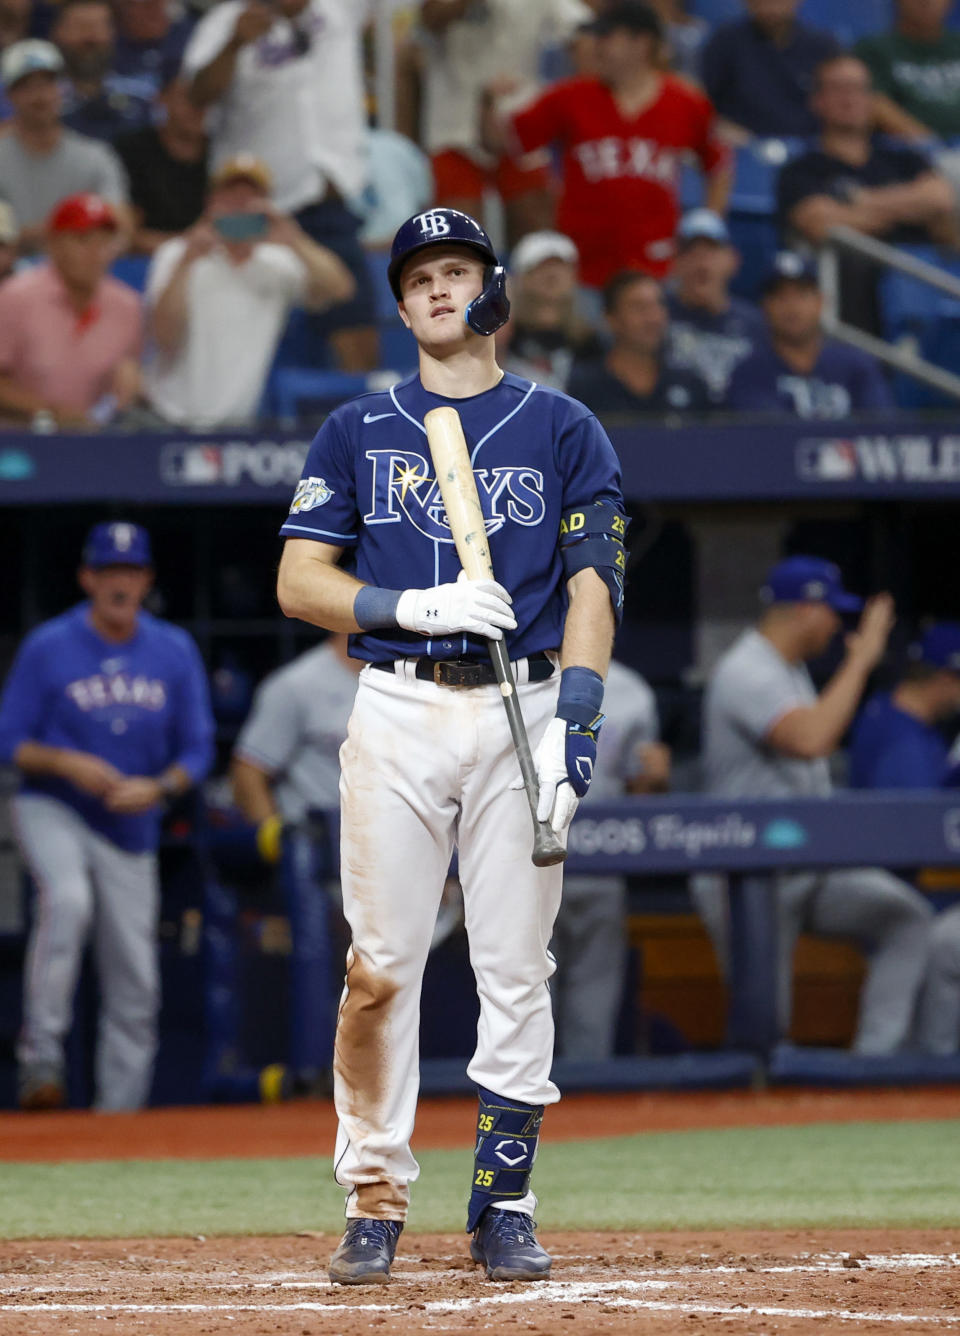 Do Rays need to win a World Series to validate their success? Yahoo